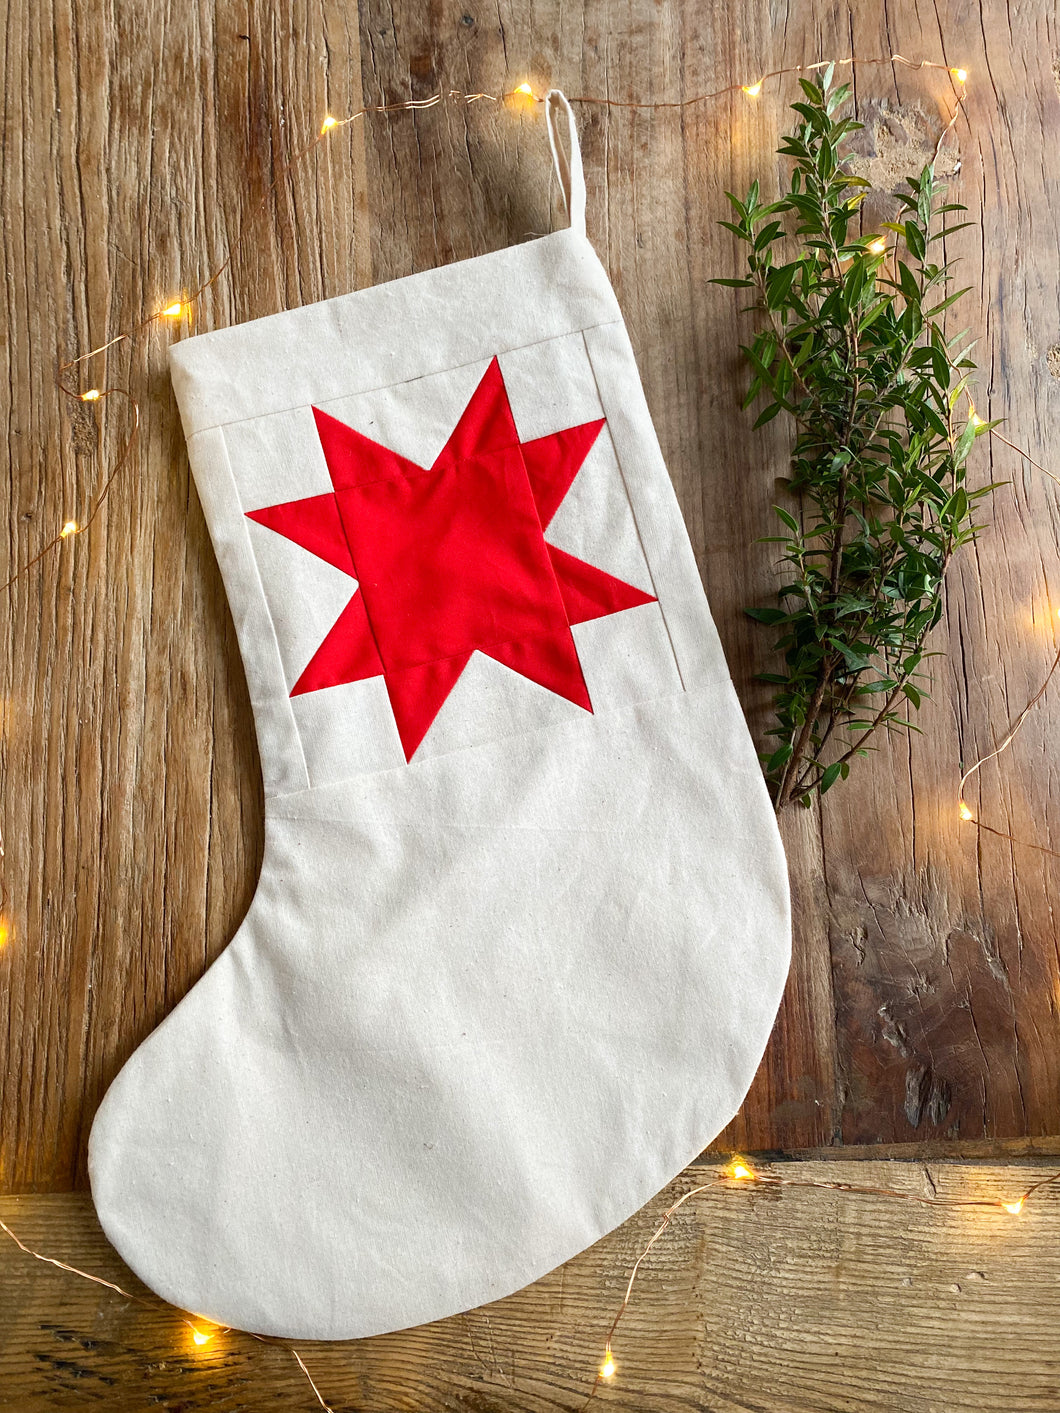 Heirloom Patchwork Star Christmas Stocking (Unquilted)